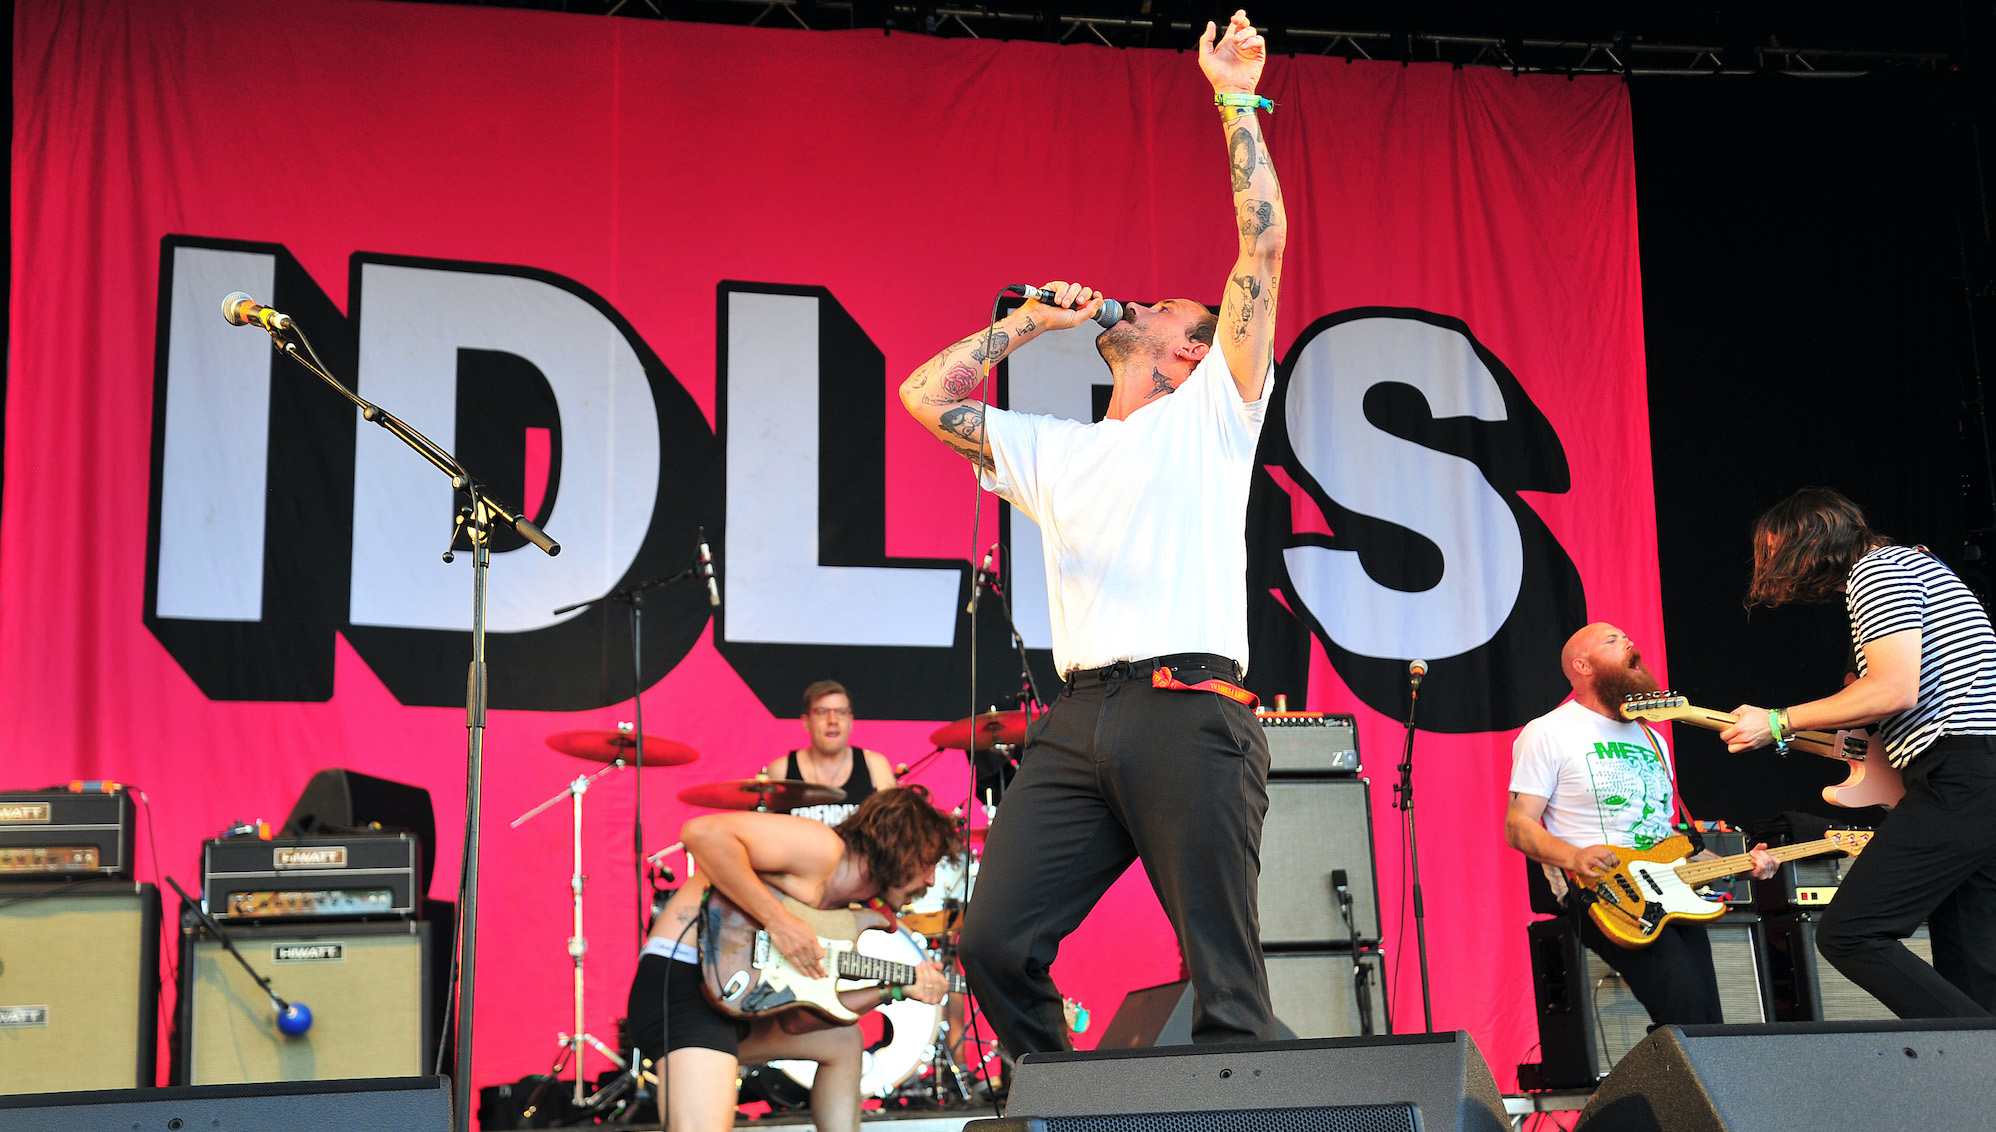 IDLES Share Video for New Song “Car Crash”